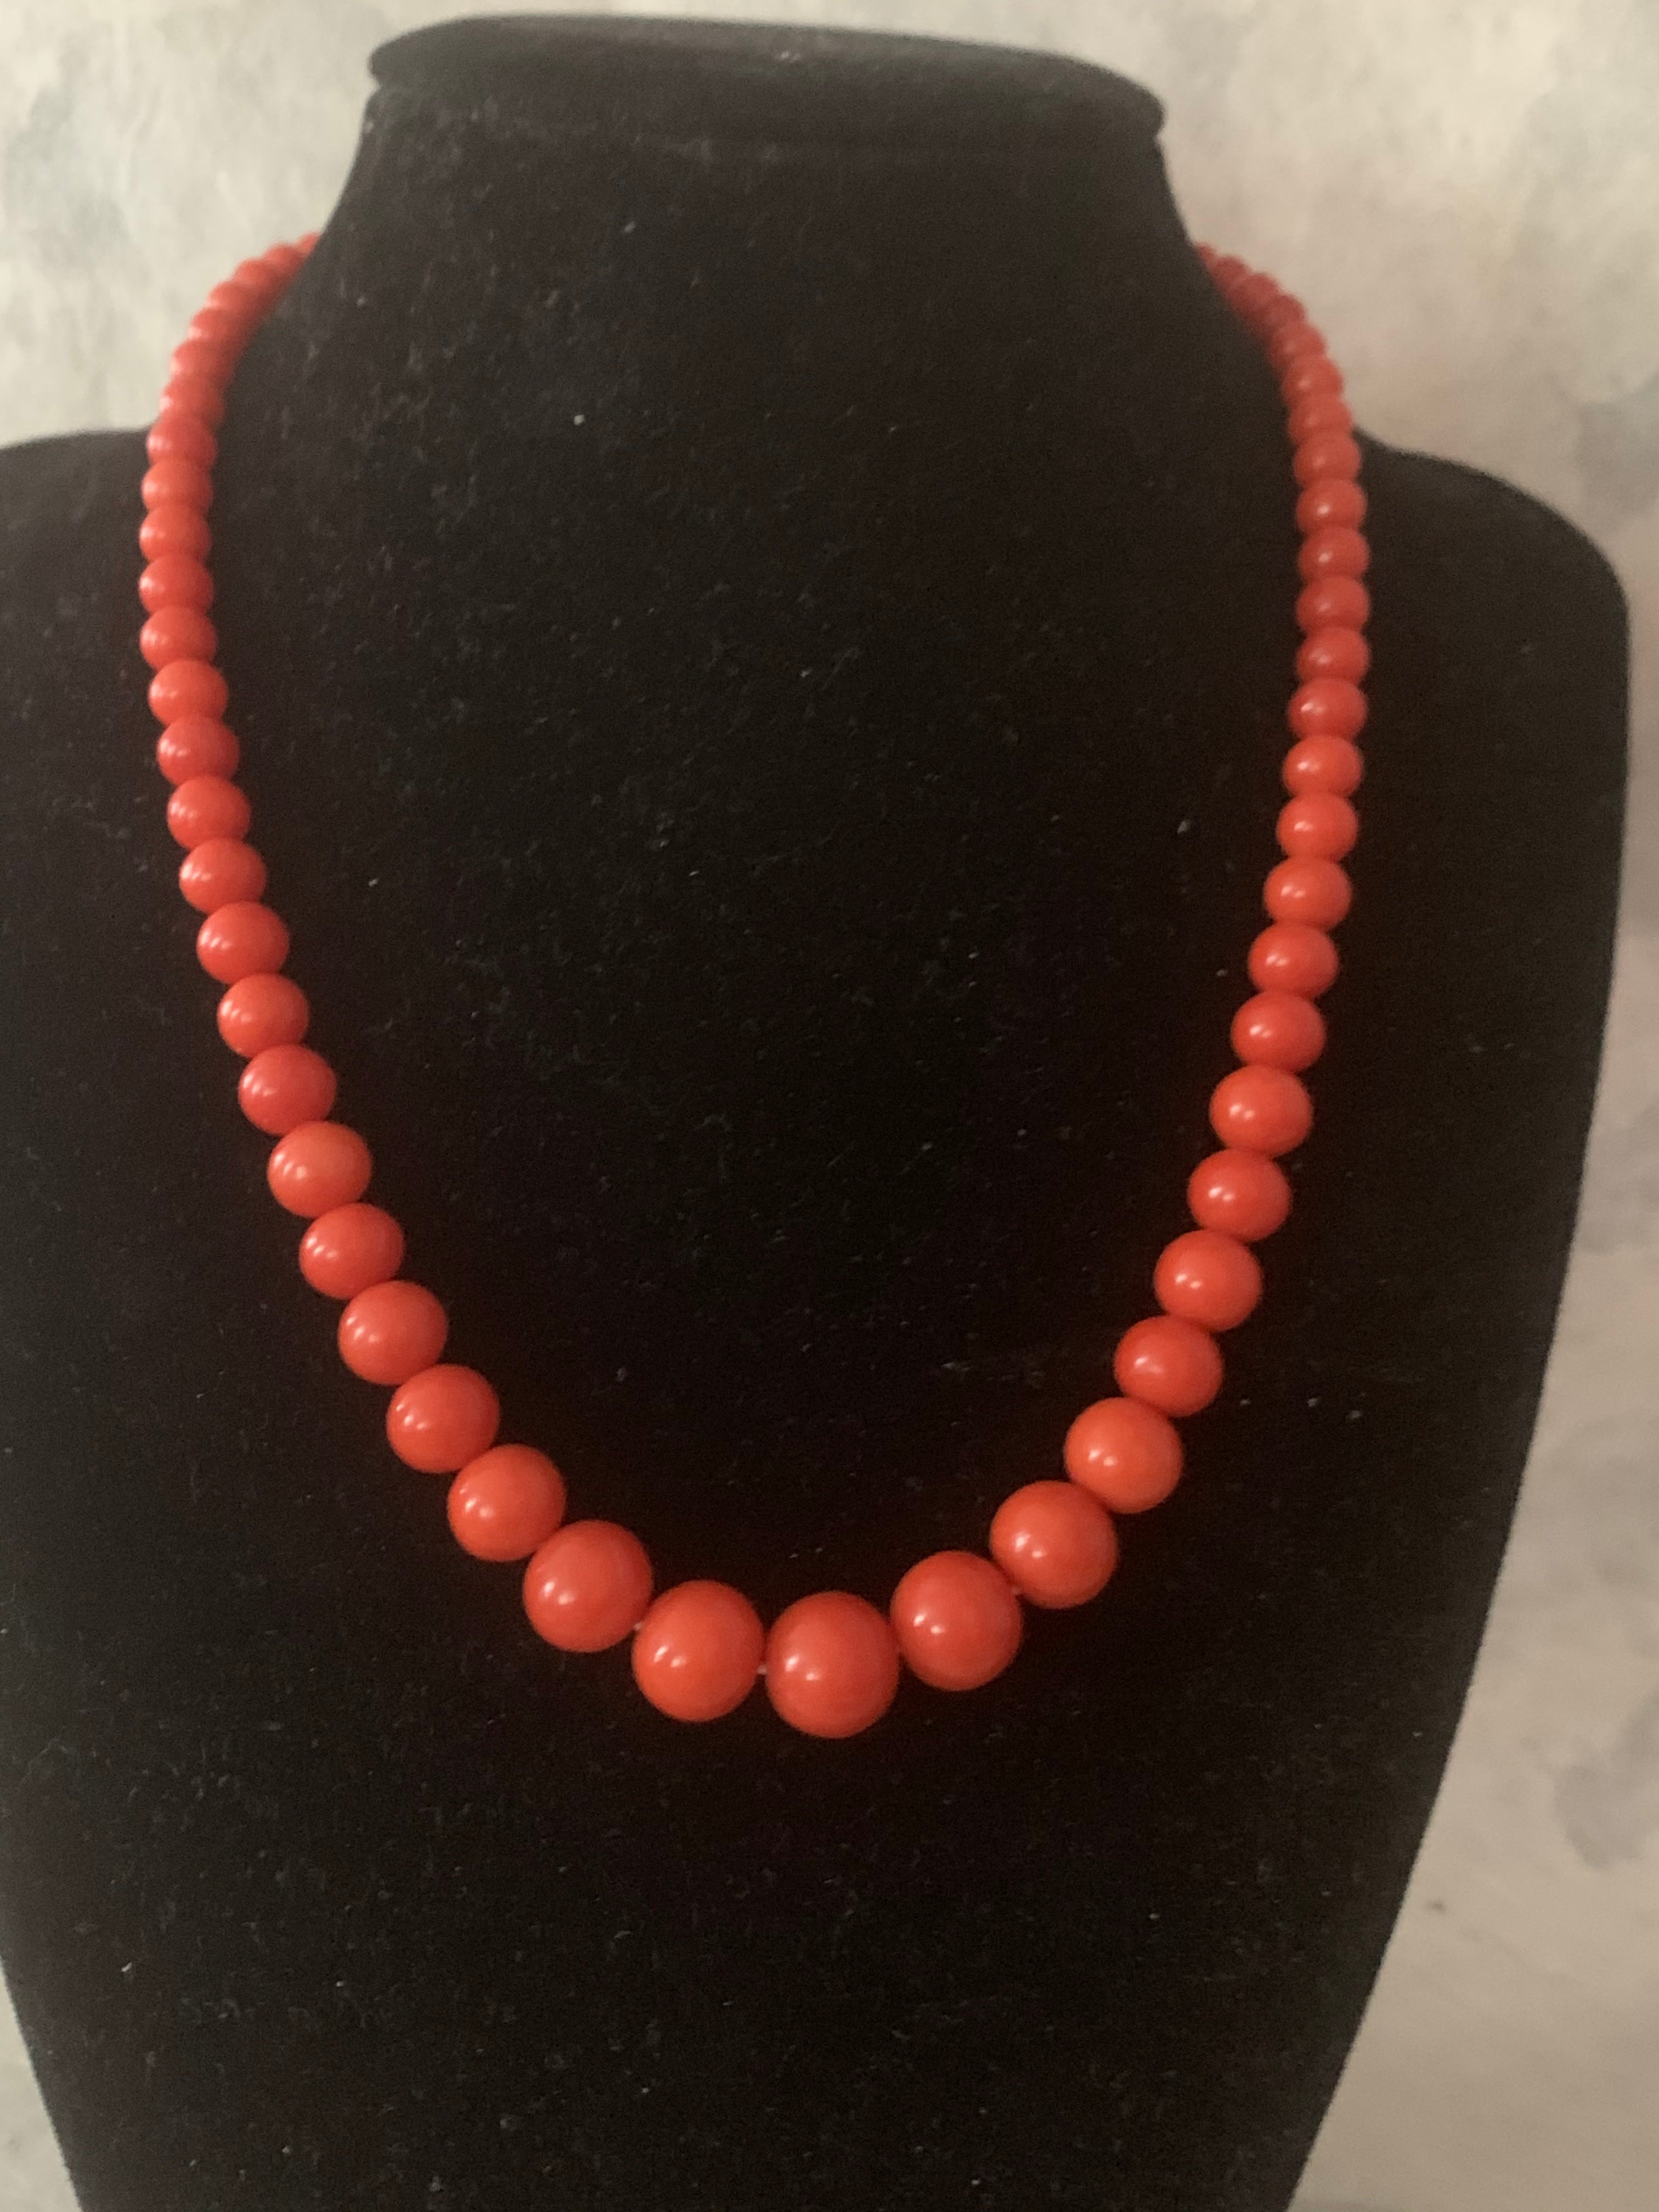 ANTIQUE 1920 ITALIAN CORAL BRANCH 24 NCHES LONG NECKLACE RARE ANTIQUE Red  Coral | eBay